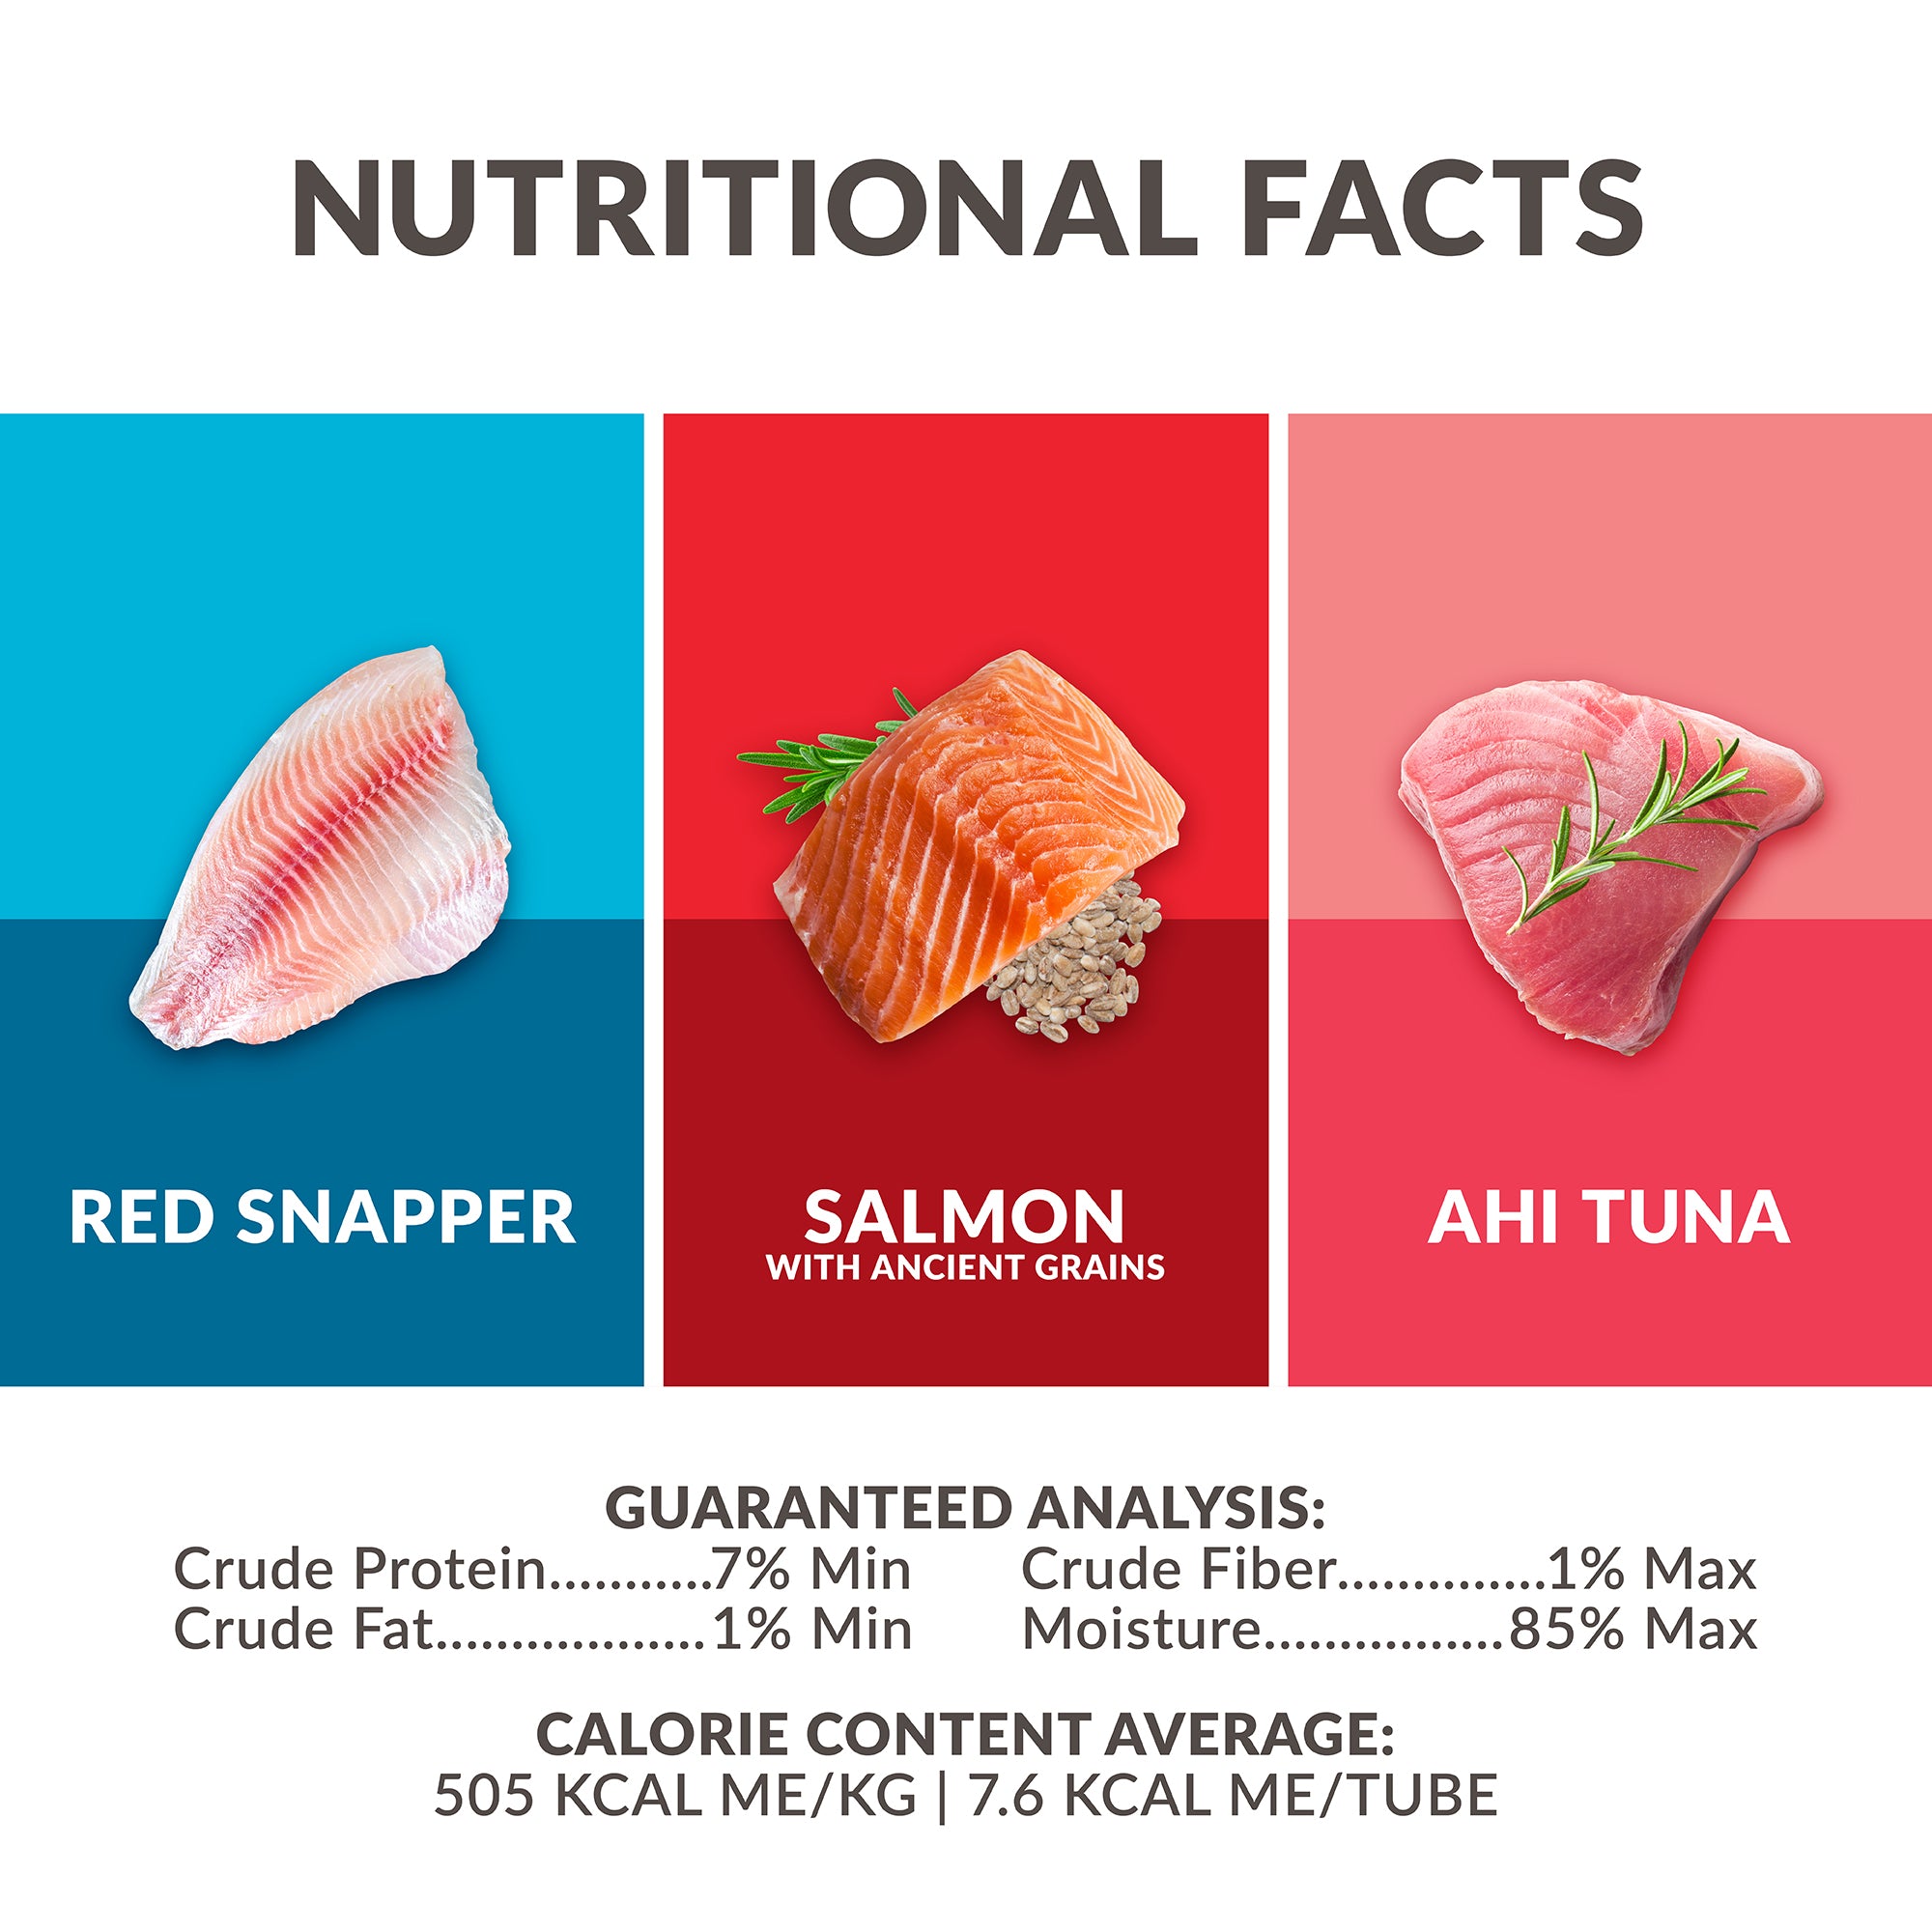 Nutritional Facts Infographic